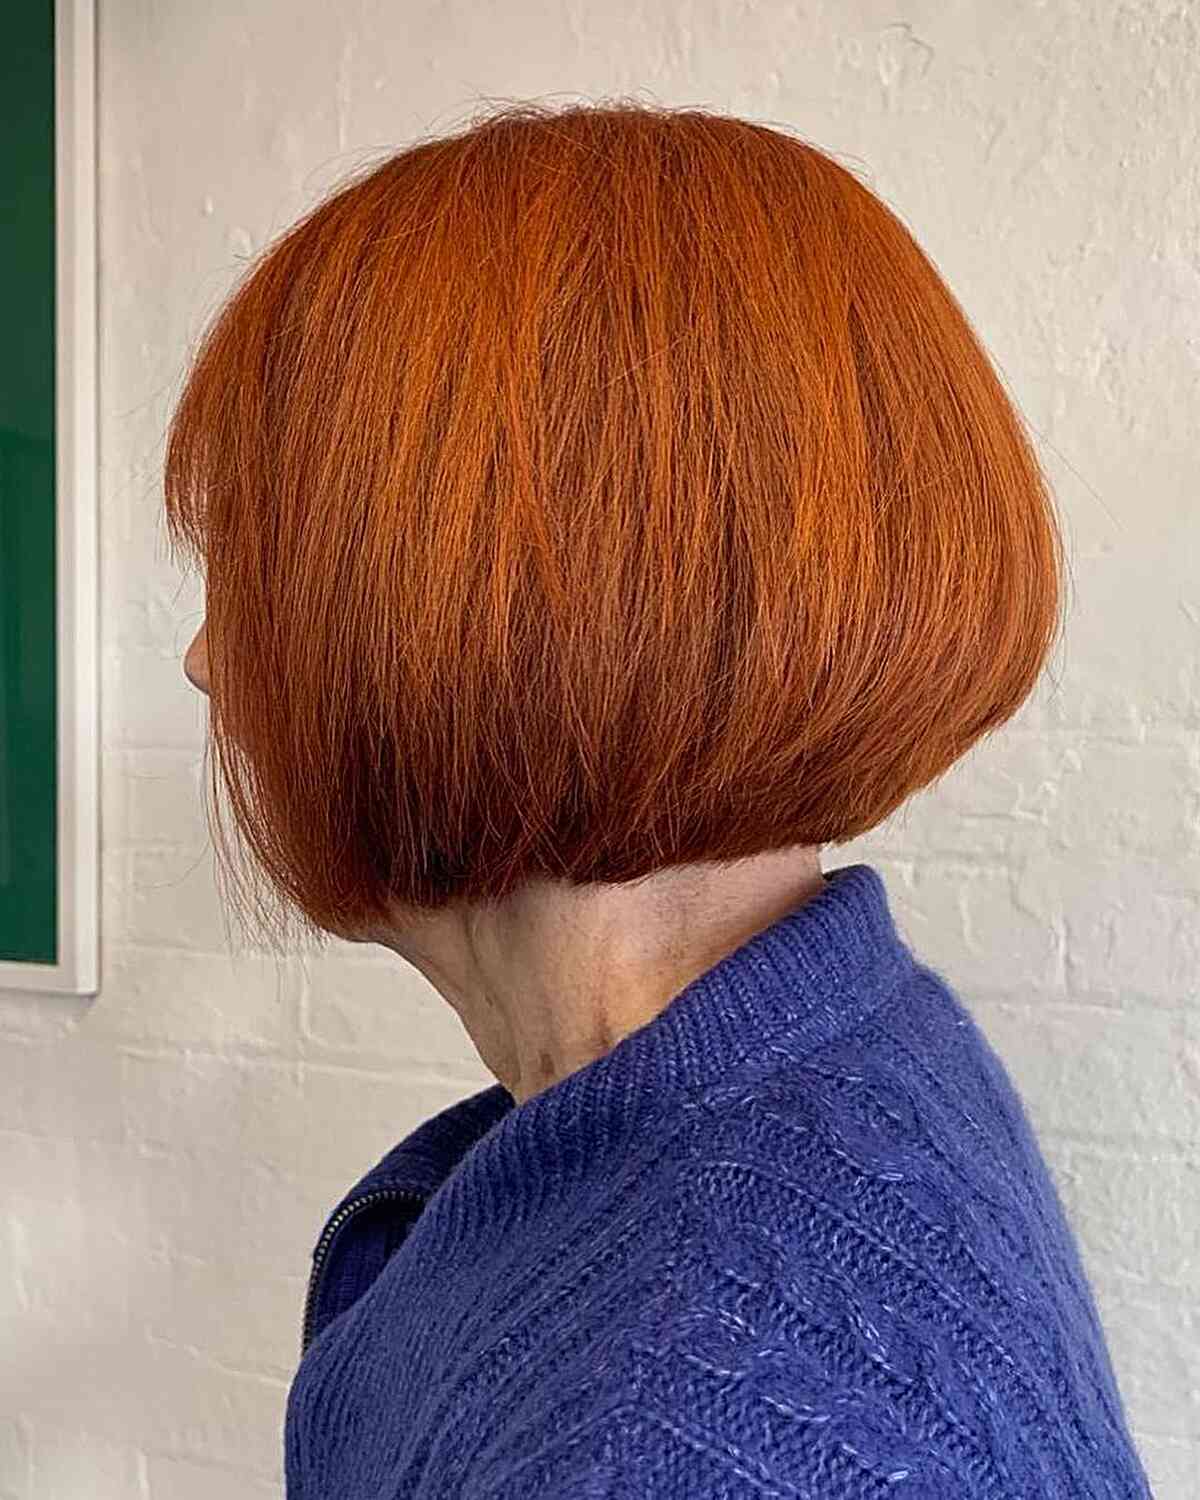 Fall-Inspired Fire Copper Short Hair for Older Ladies Aged 60